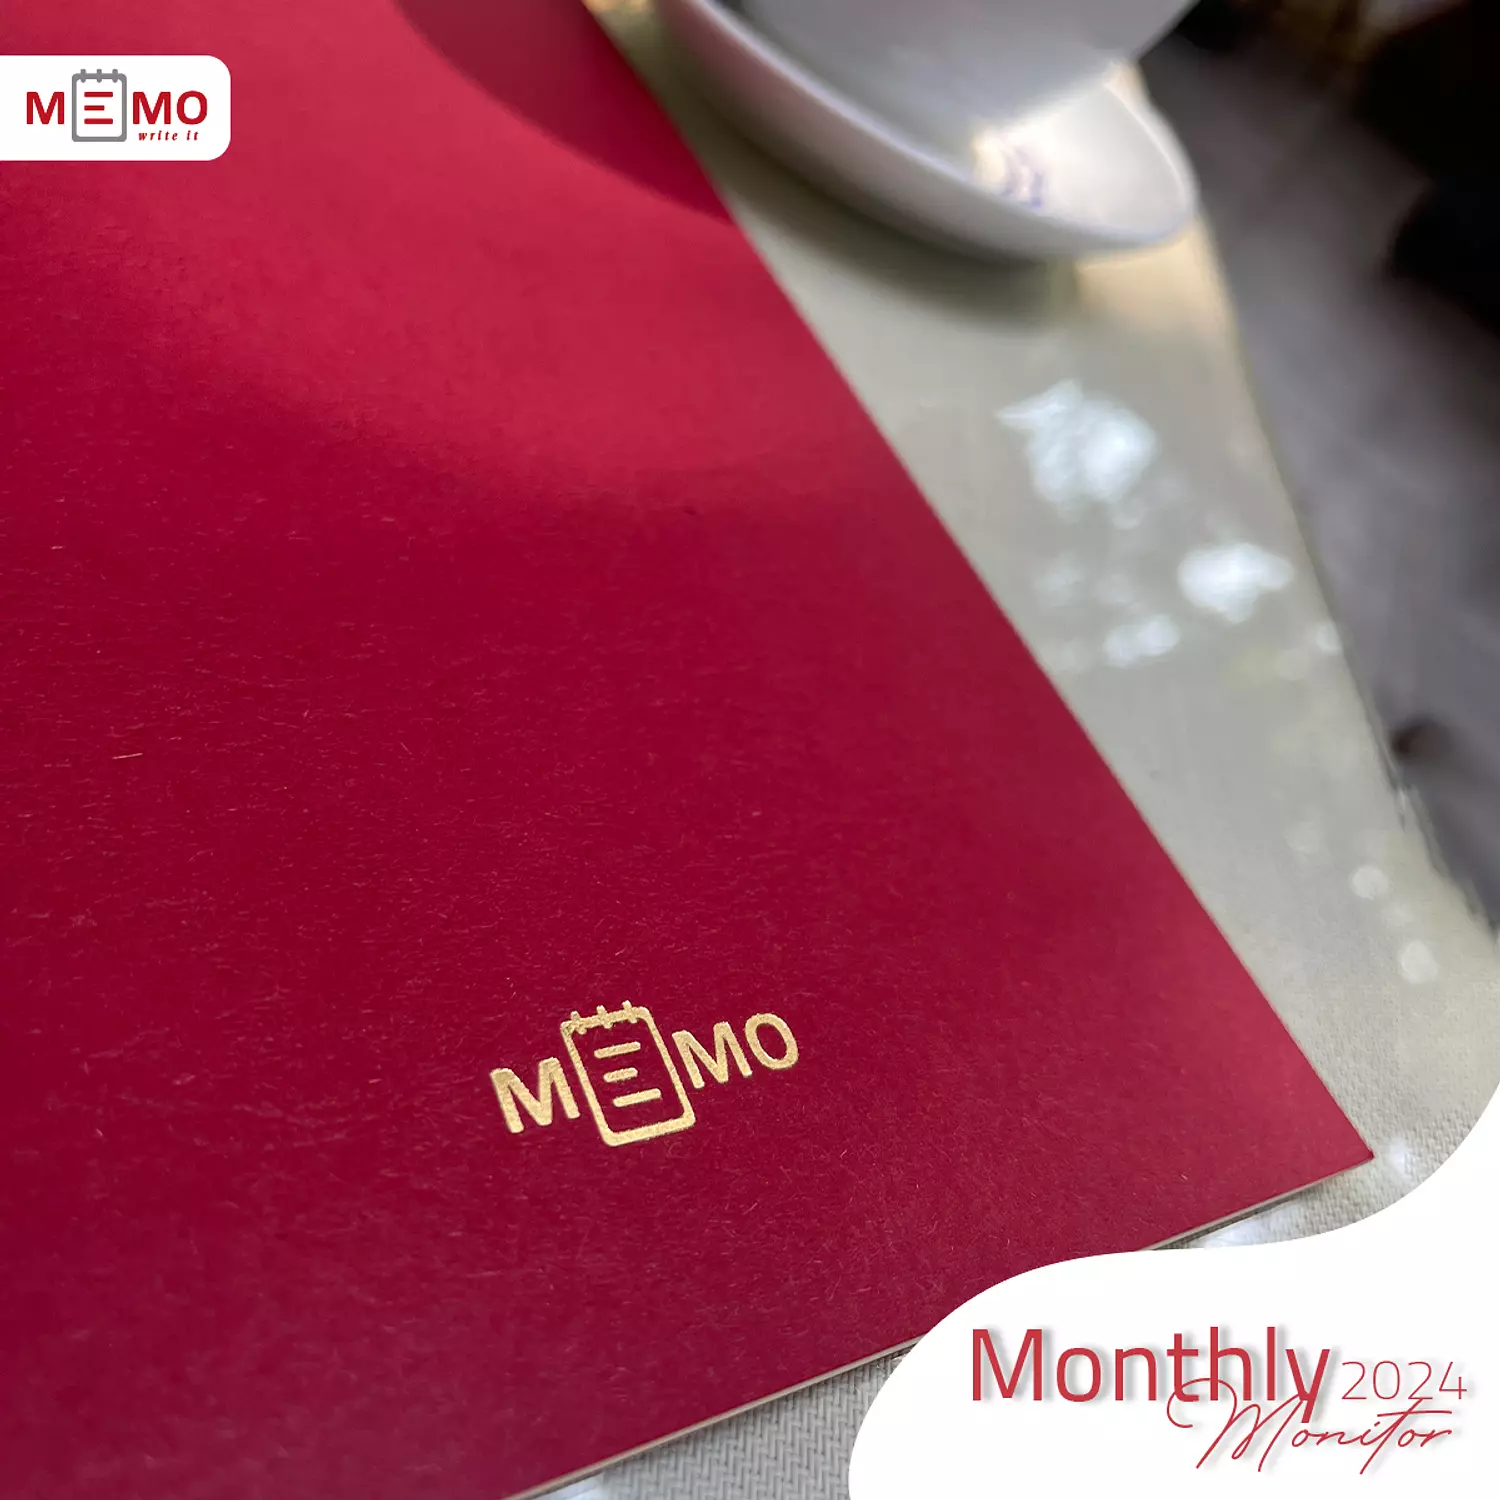 Memo Monthly Monitor 2024 5